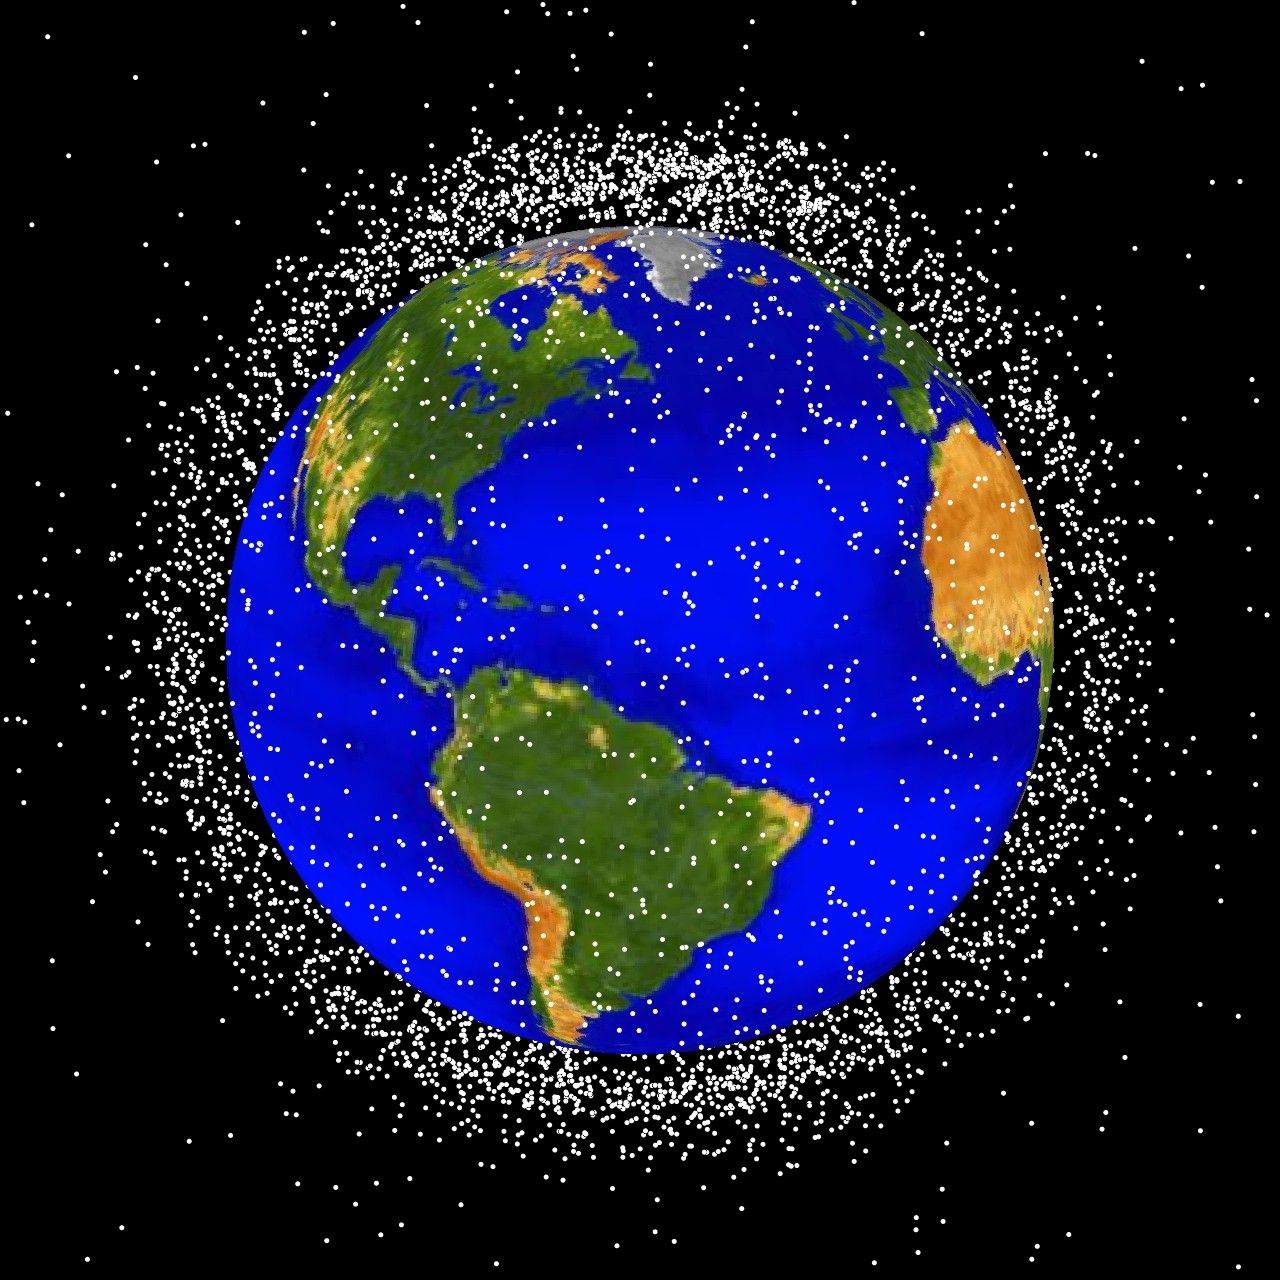 Illustration of space junk items orbiting Earth